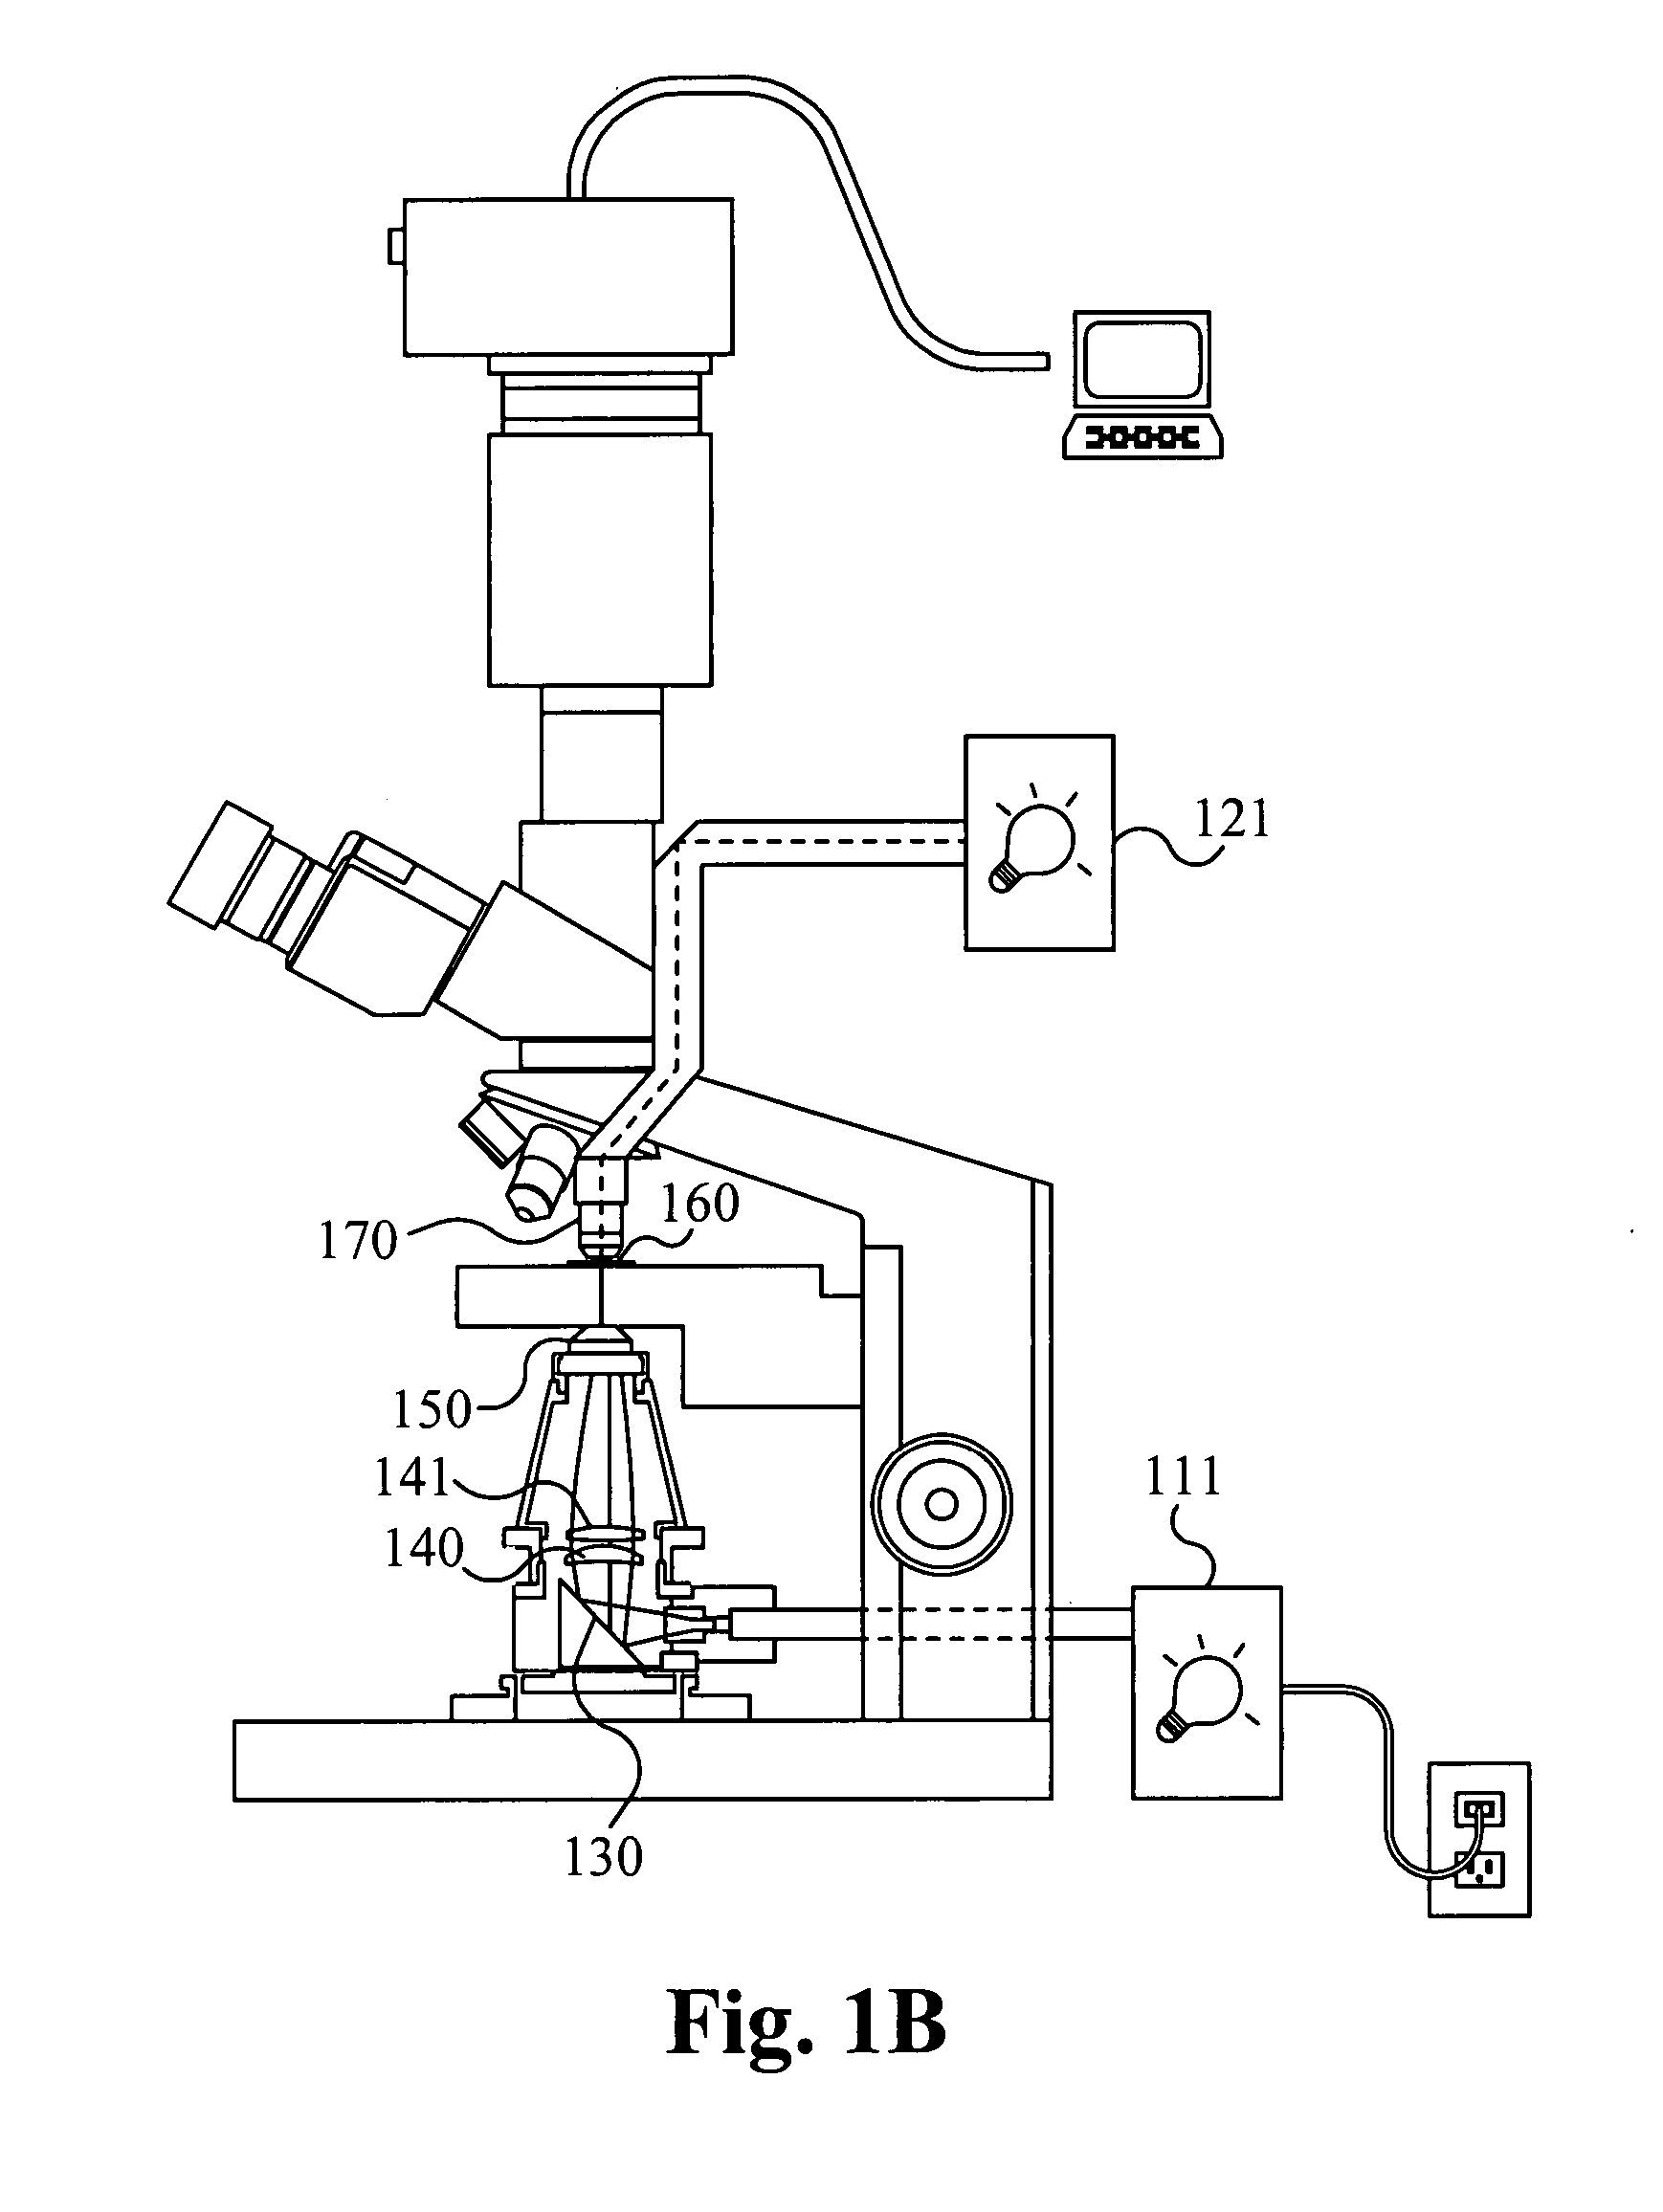 Applications for mixing and combining light utilizing a transmission filter, iris, aperture apparatus